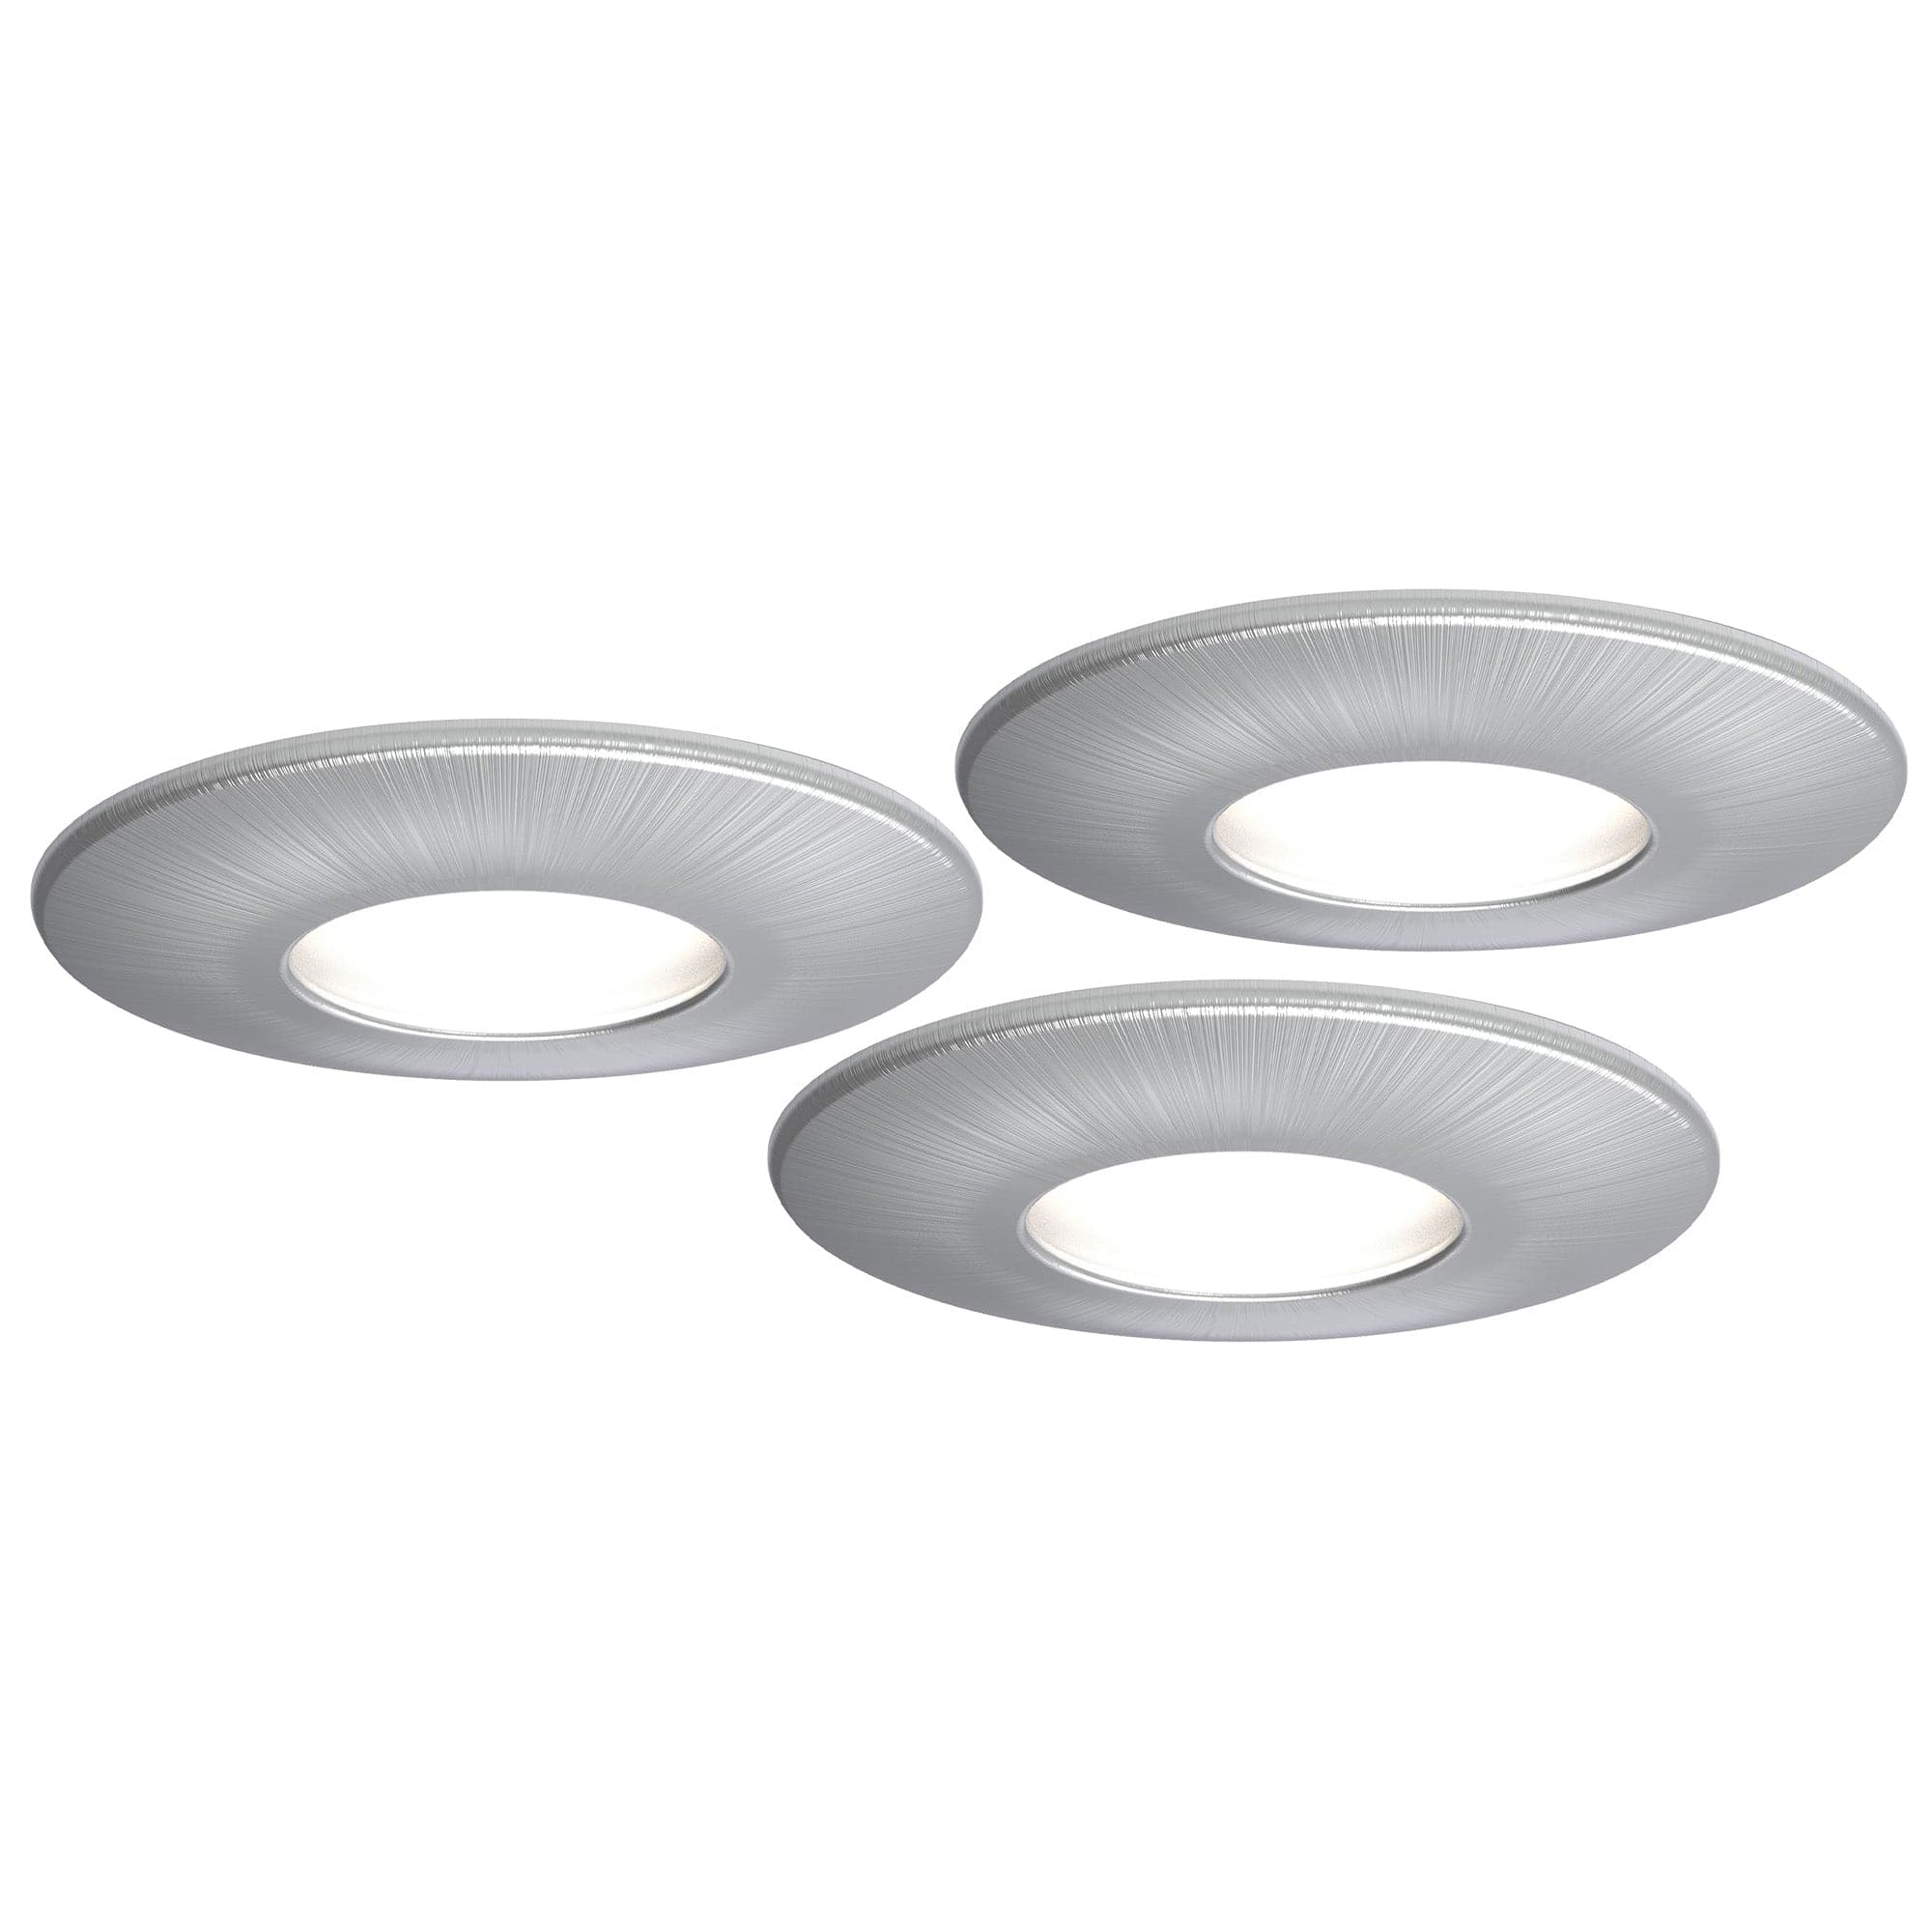 4lite WiZ Connected Fire-Rated IP20 GU10 Smart LED Downlight - Satin Chrome (Pack of 3)